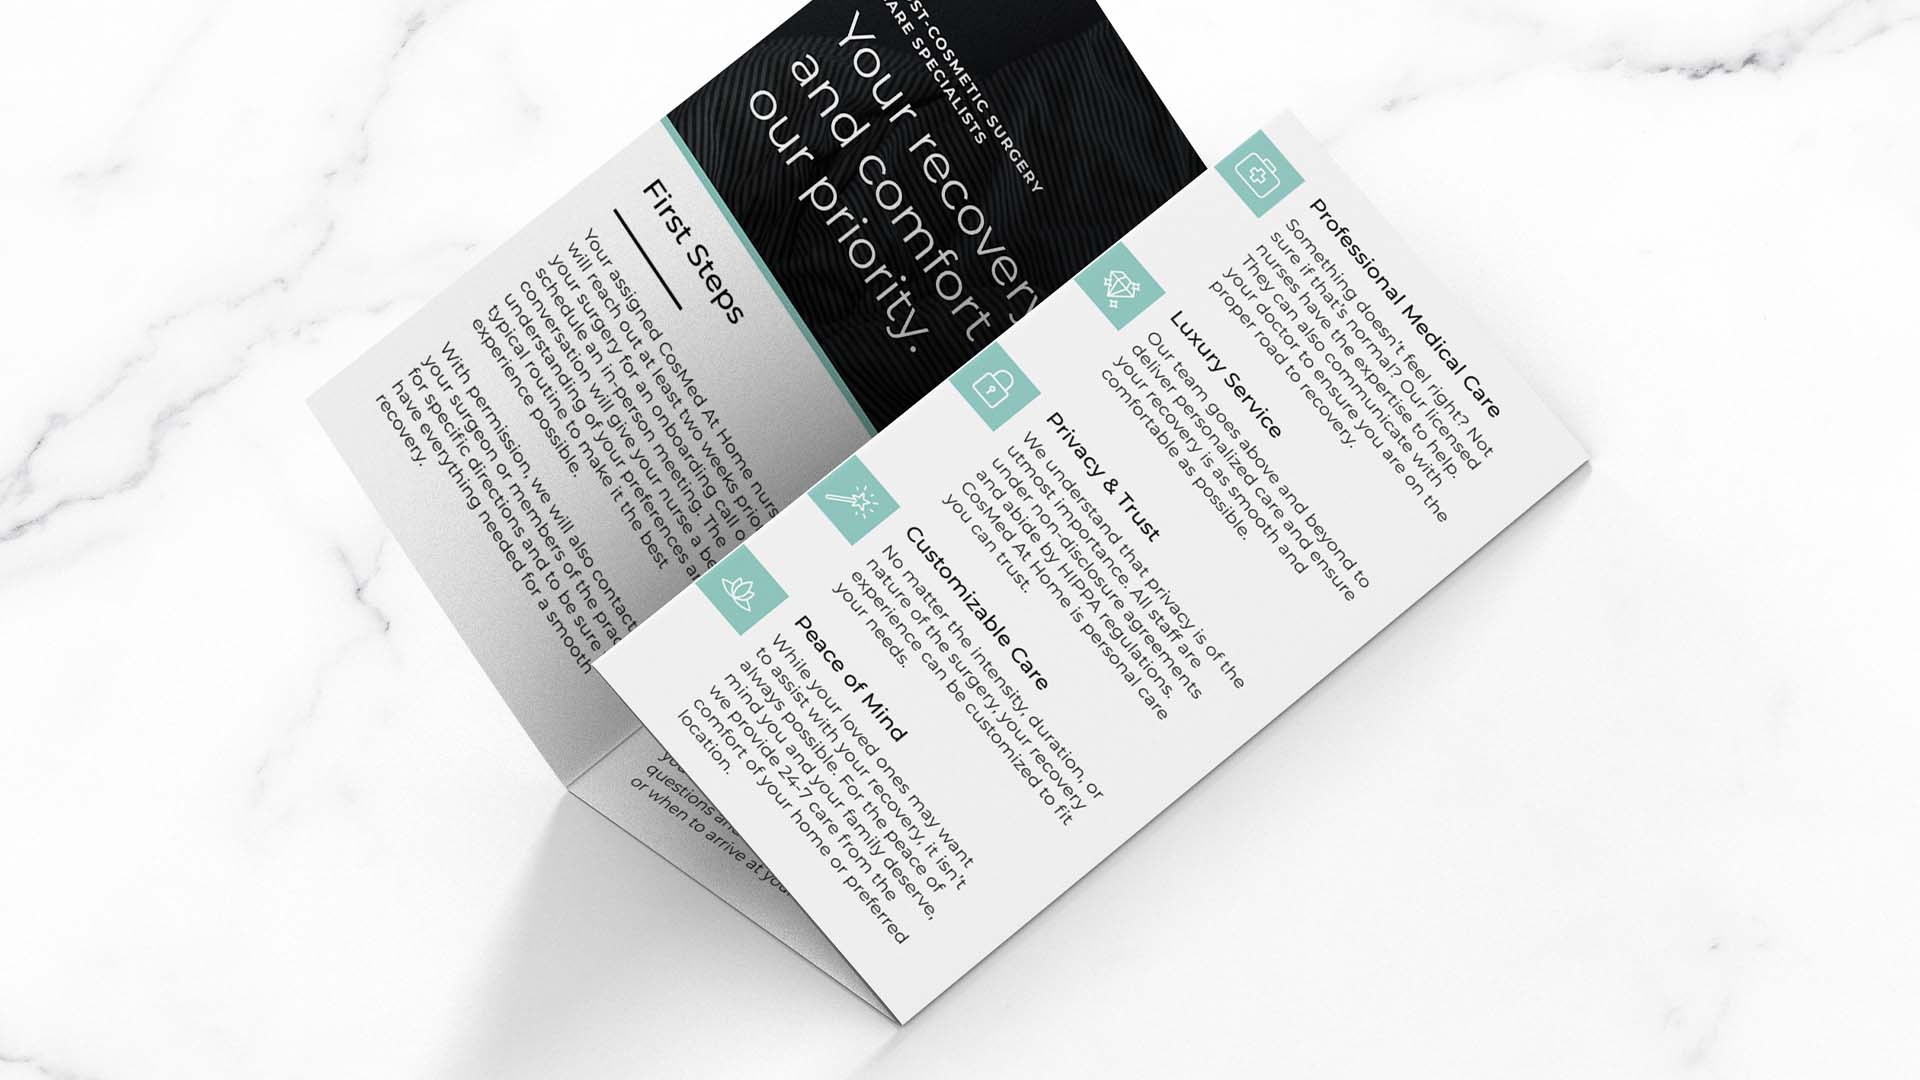 Cosmed brochure outlining 5 pillars of excellence